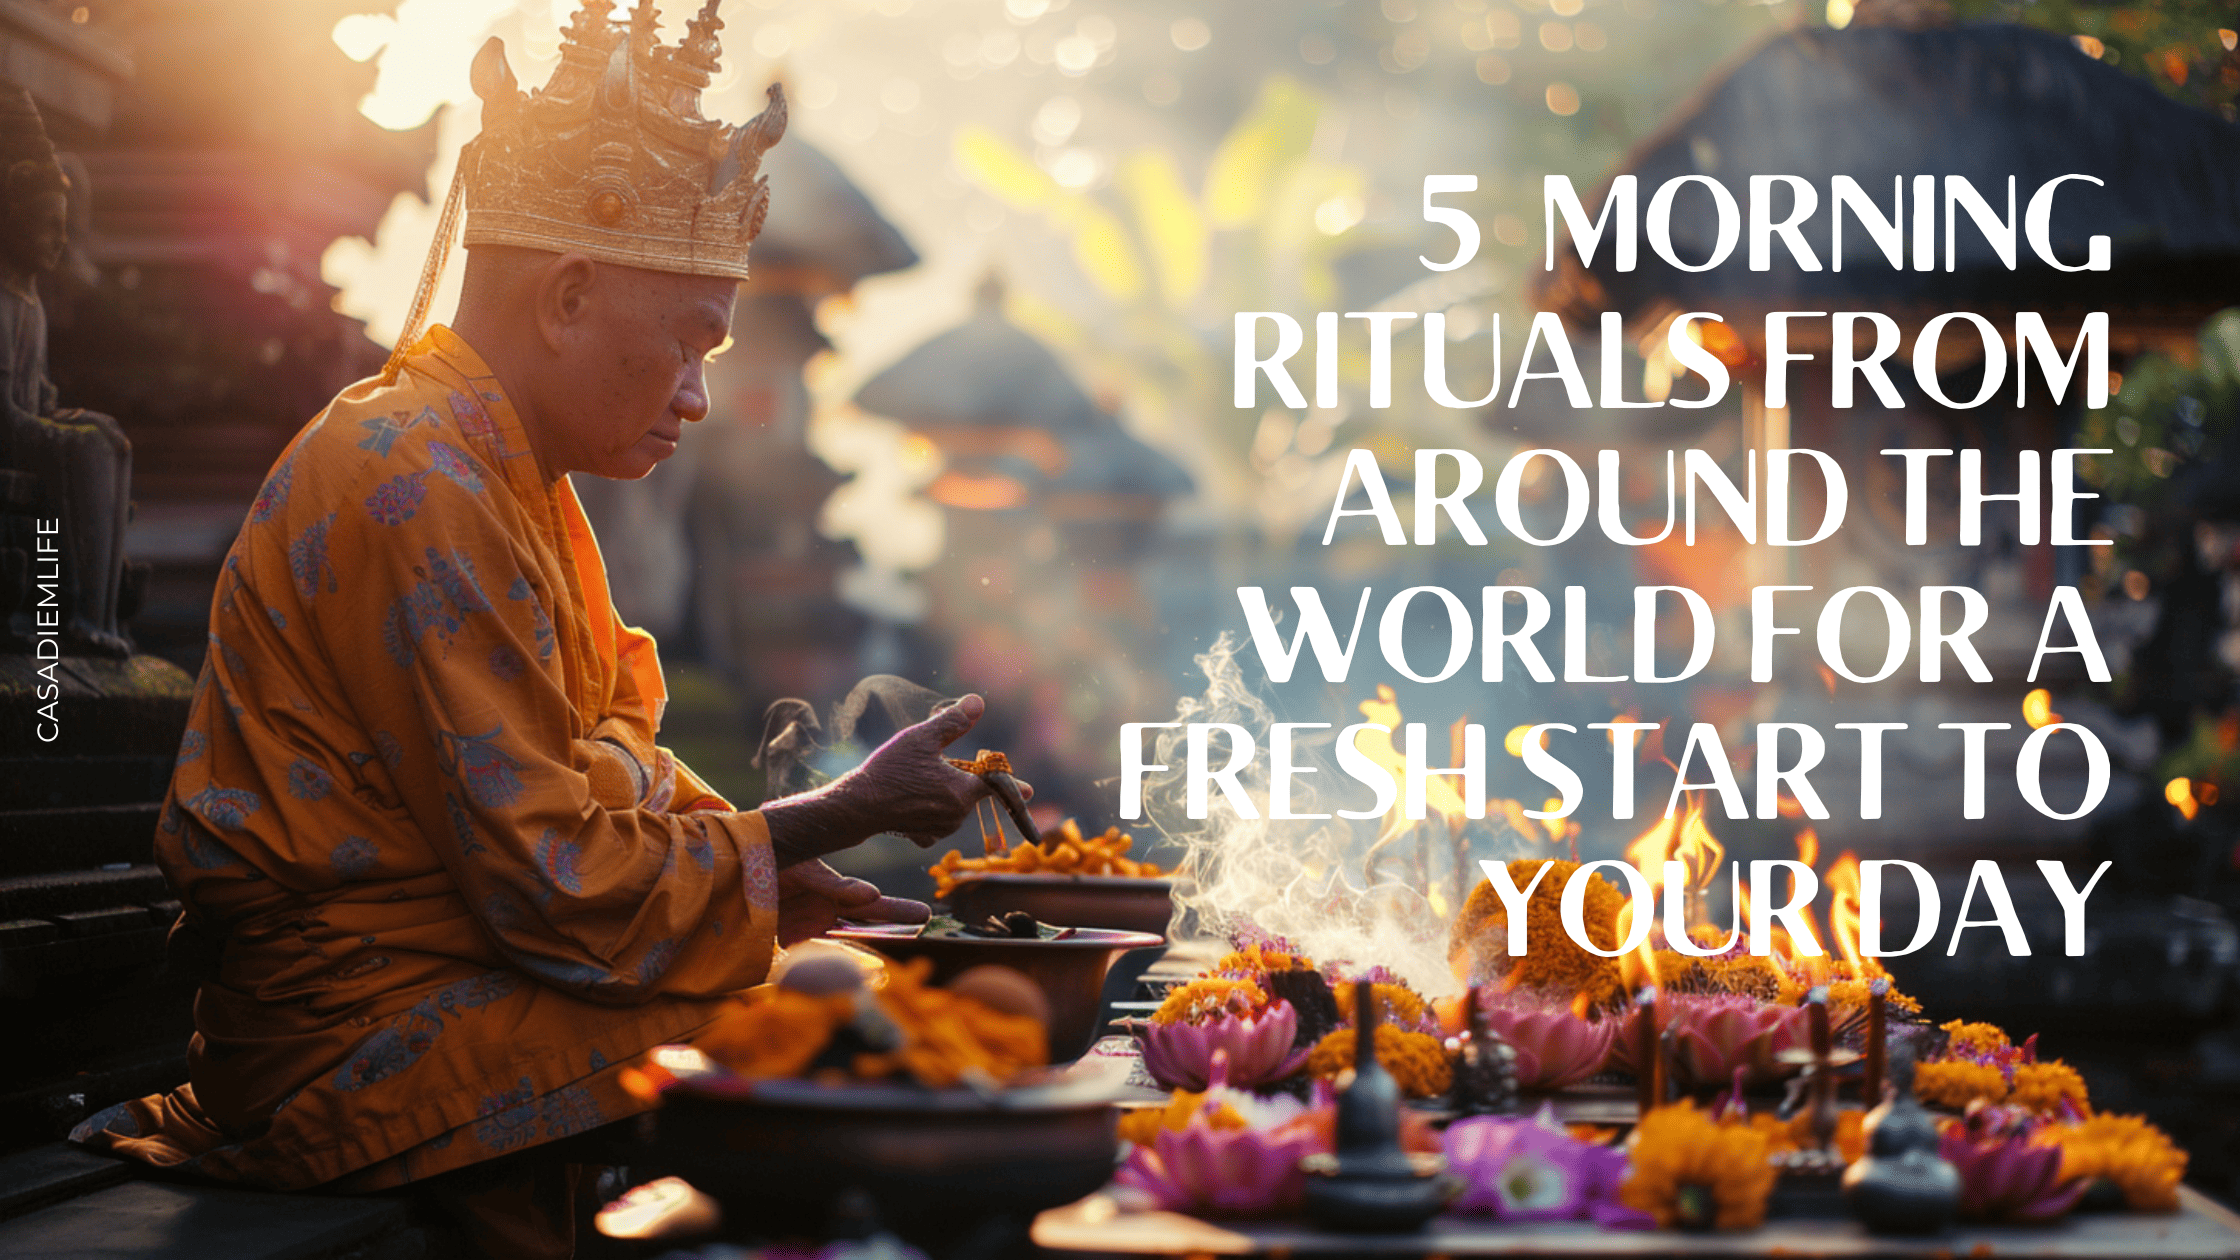 5 morning rituals from around the world to start your day fresh